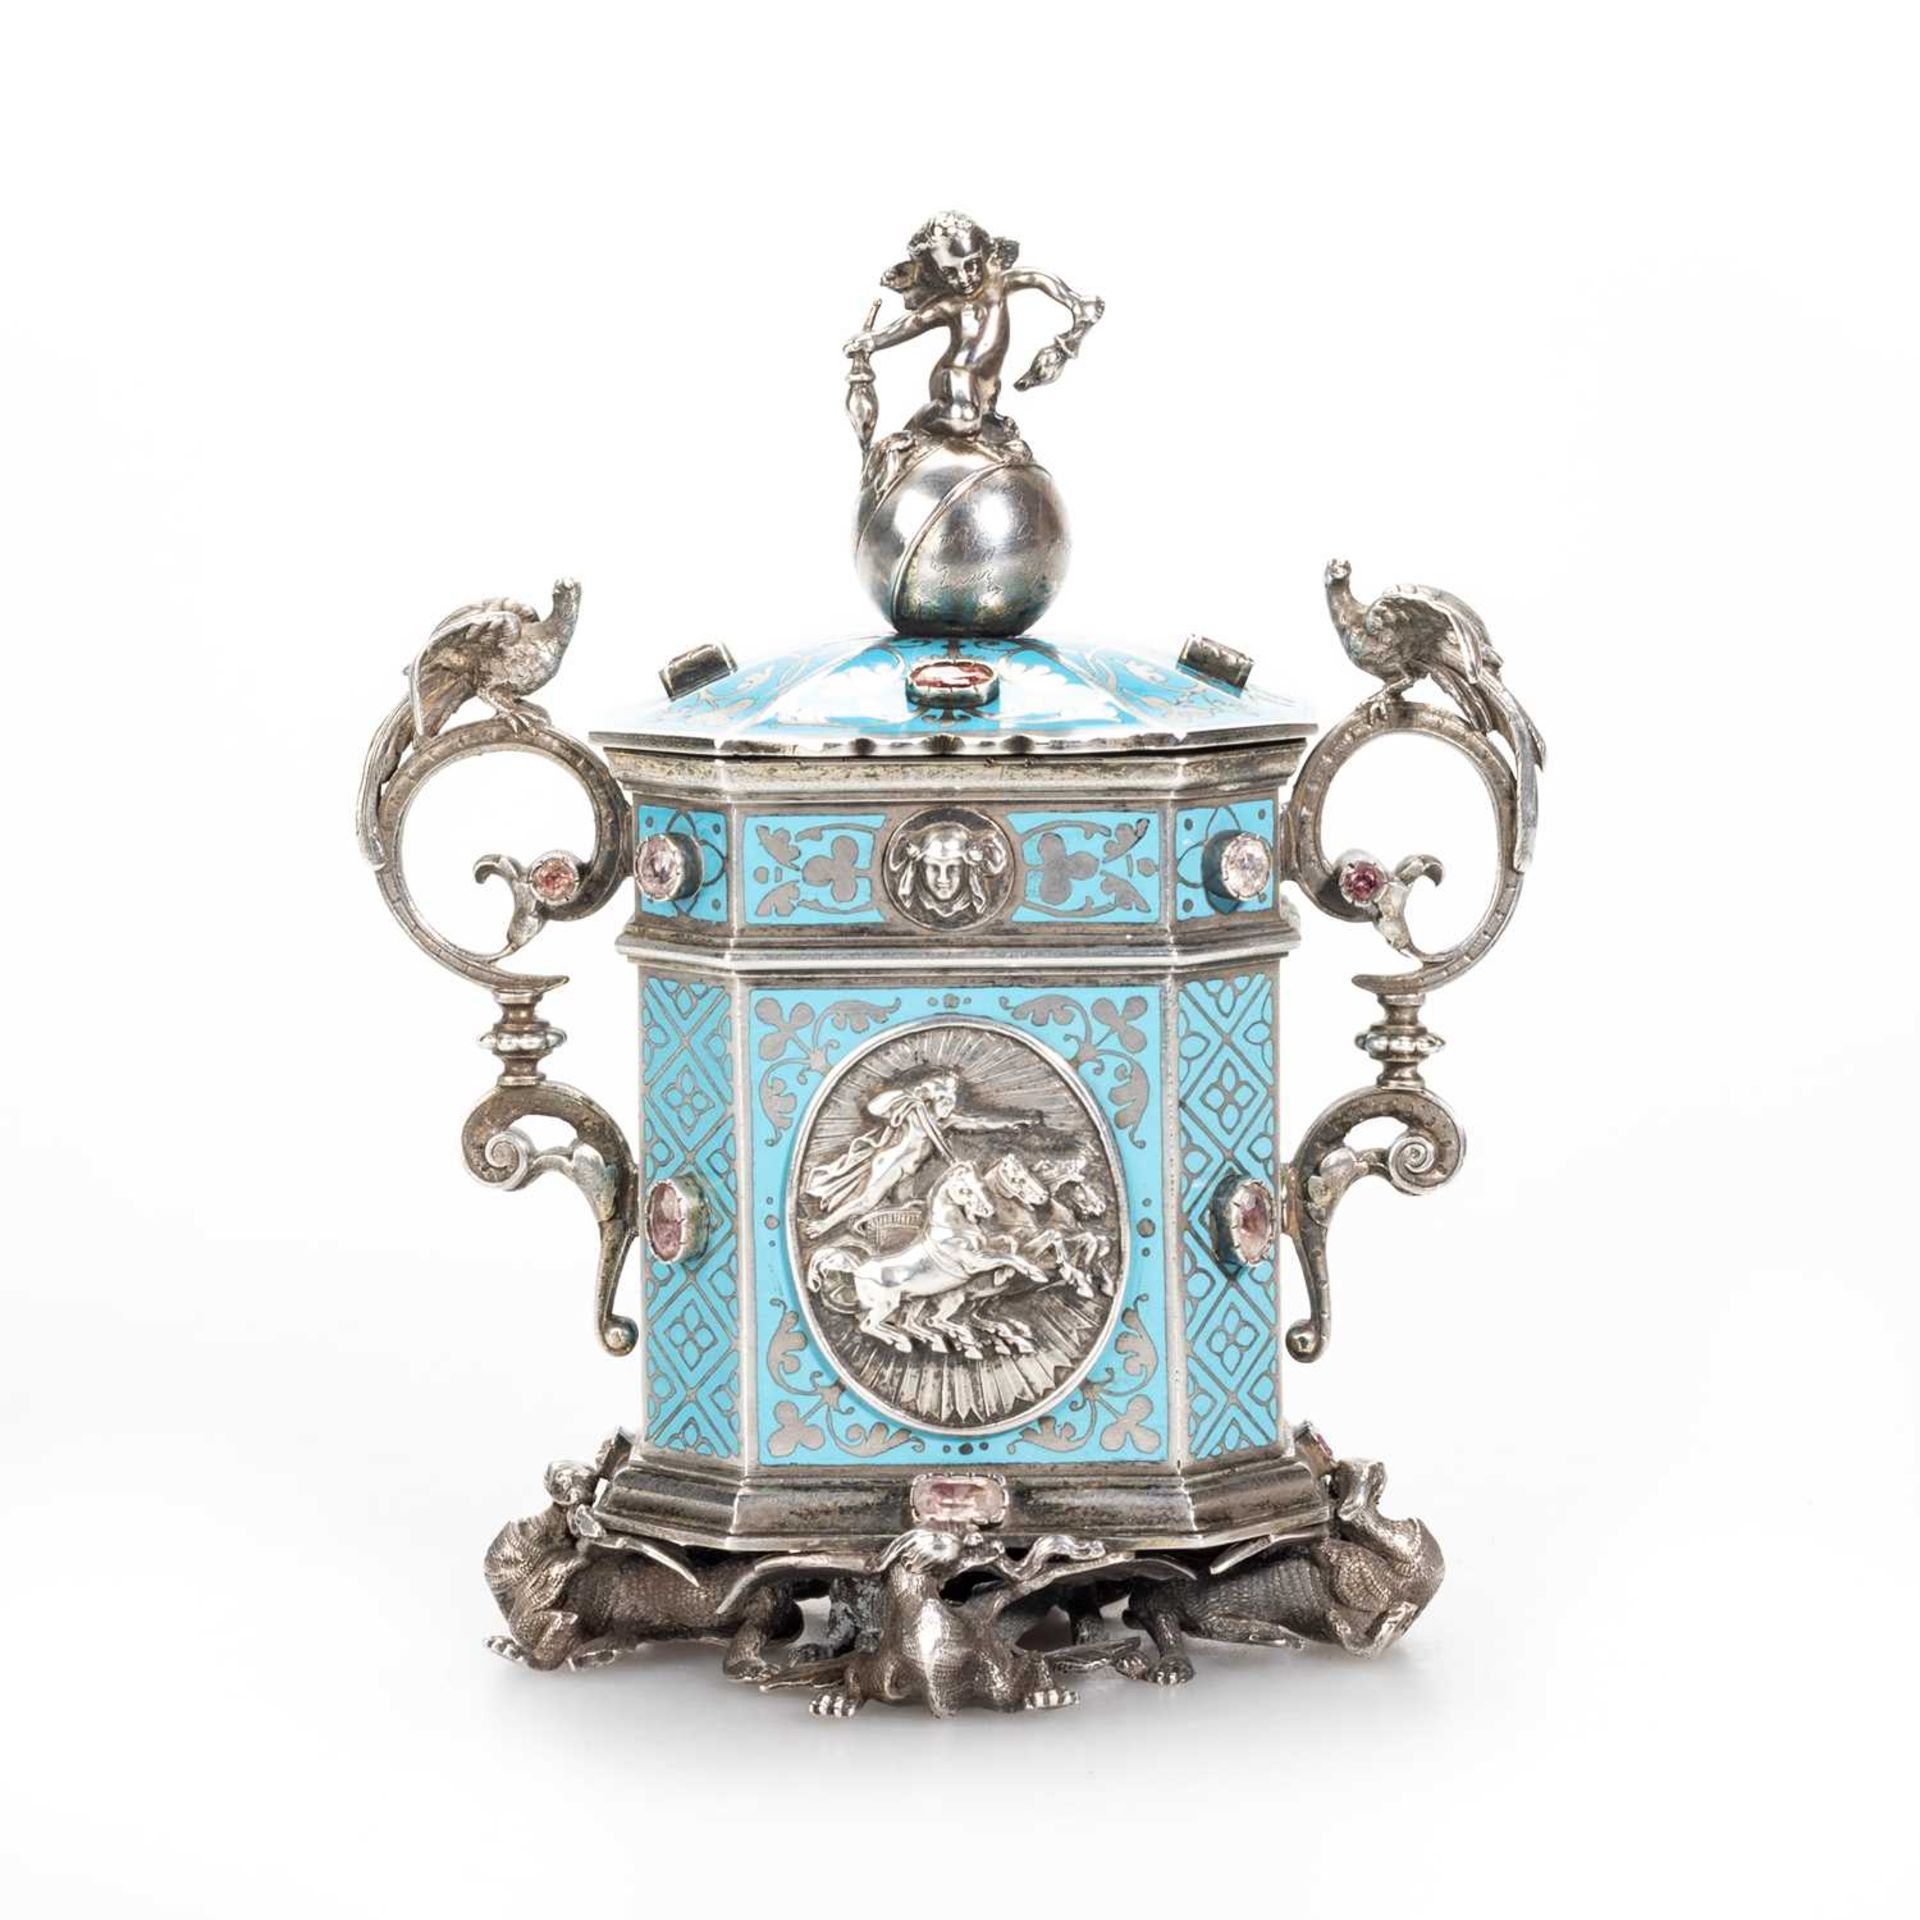 A 19TH CENTURY FRENCH SILVER AND ENAMEL TABLE VESTA, BY FRANÇOIS-DÉSIRÉ FROMENT-MEURICE (1802-1855) - Image 2 of 4